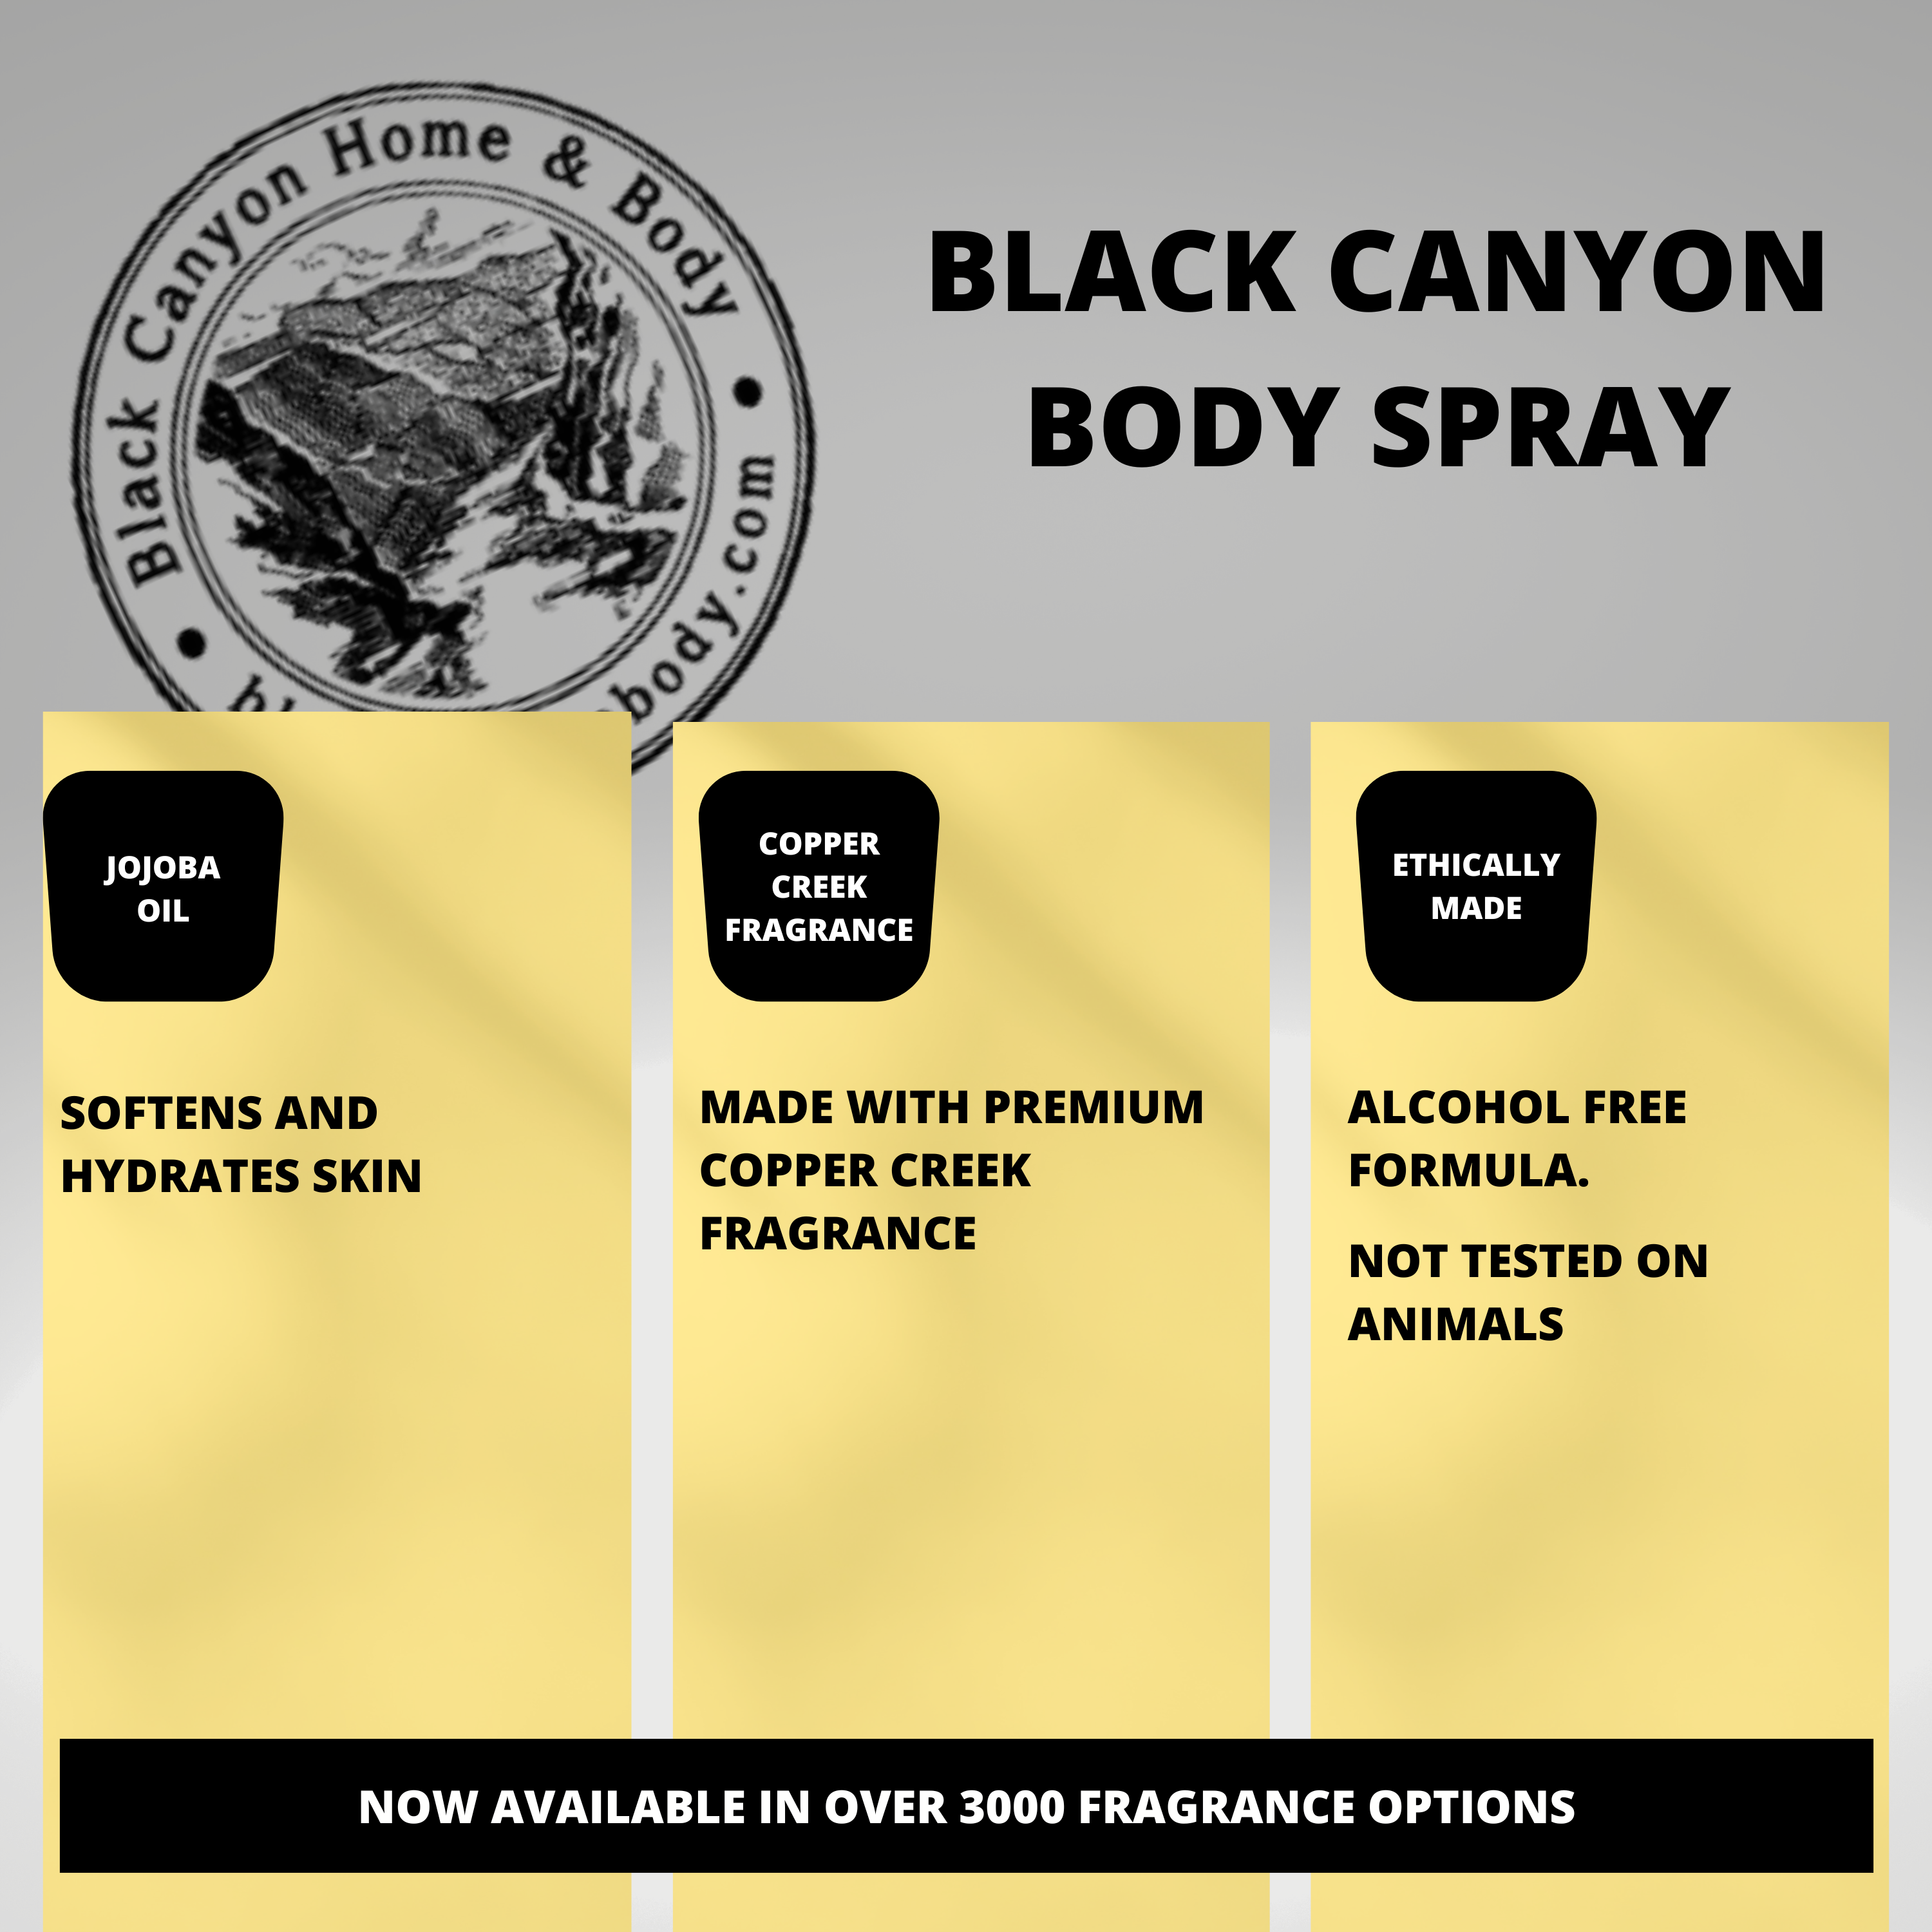 Black Canyon Apricot Slices Scented Body Spray